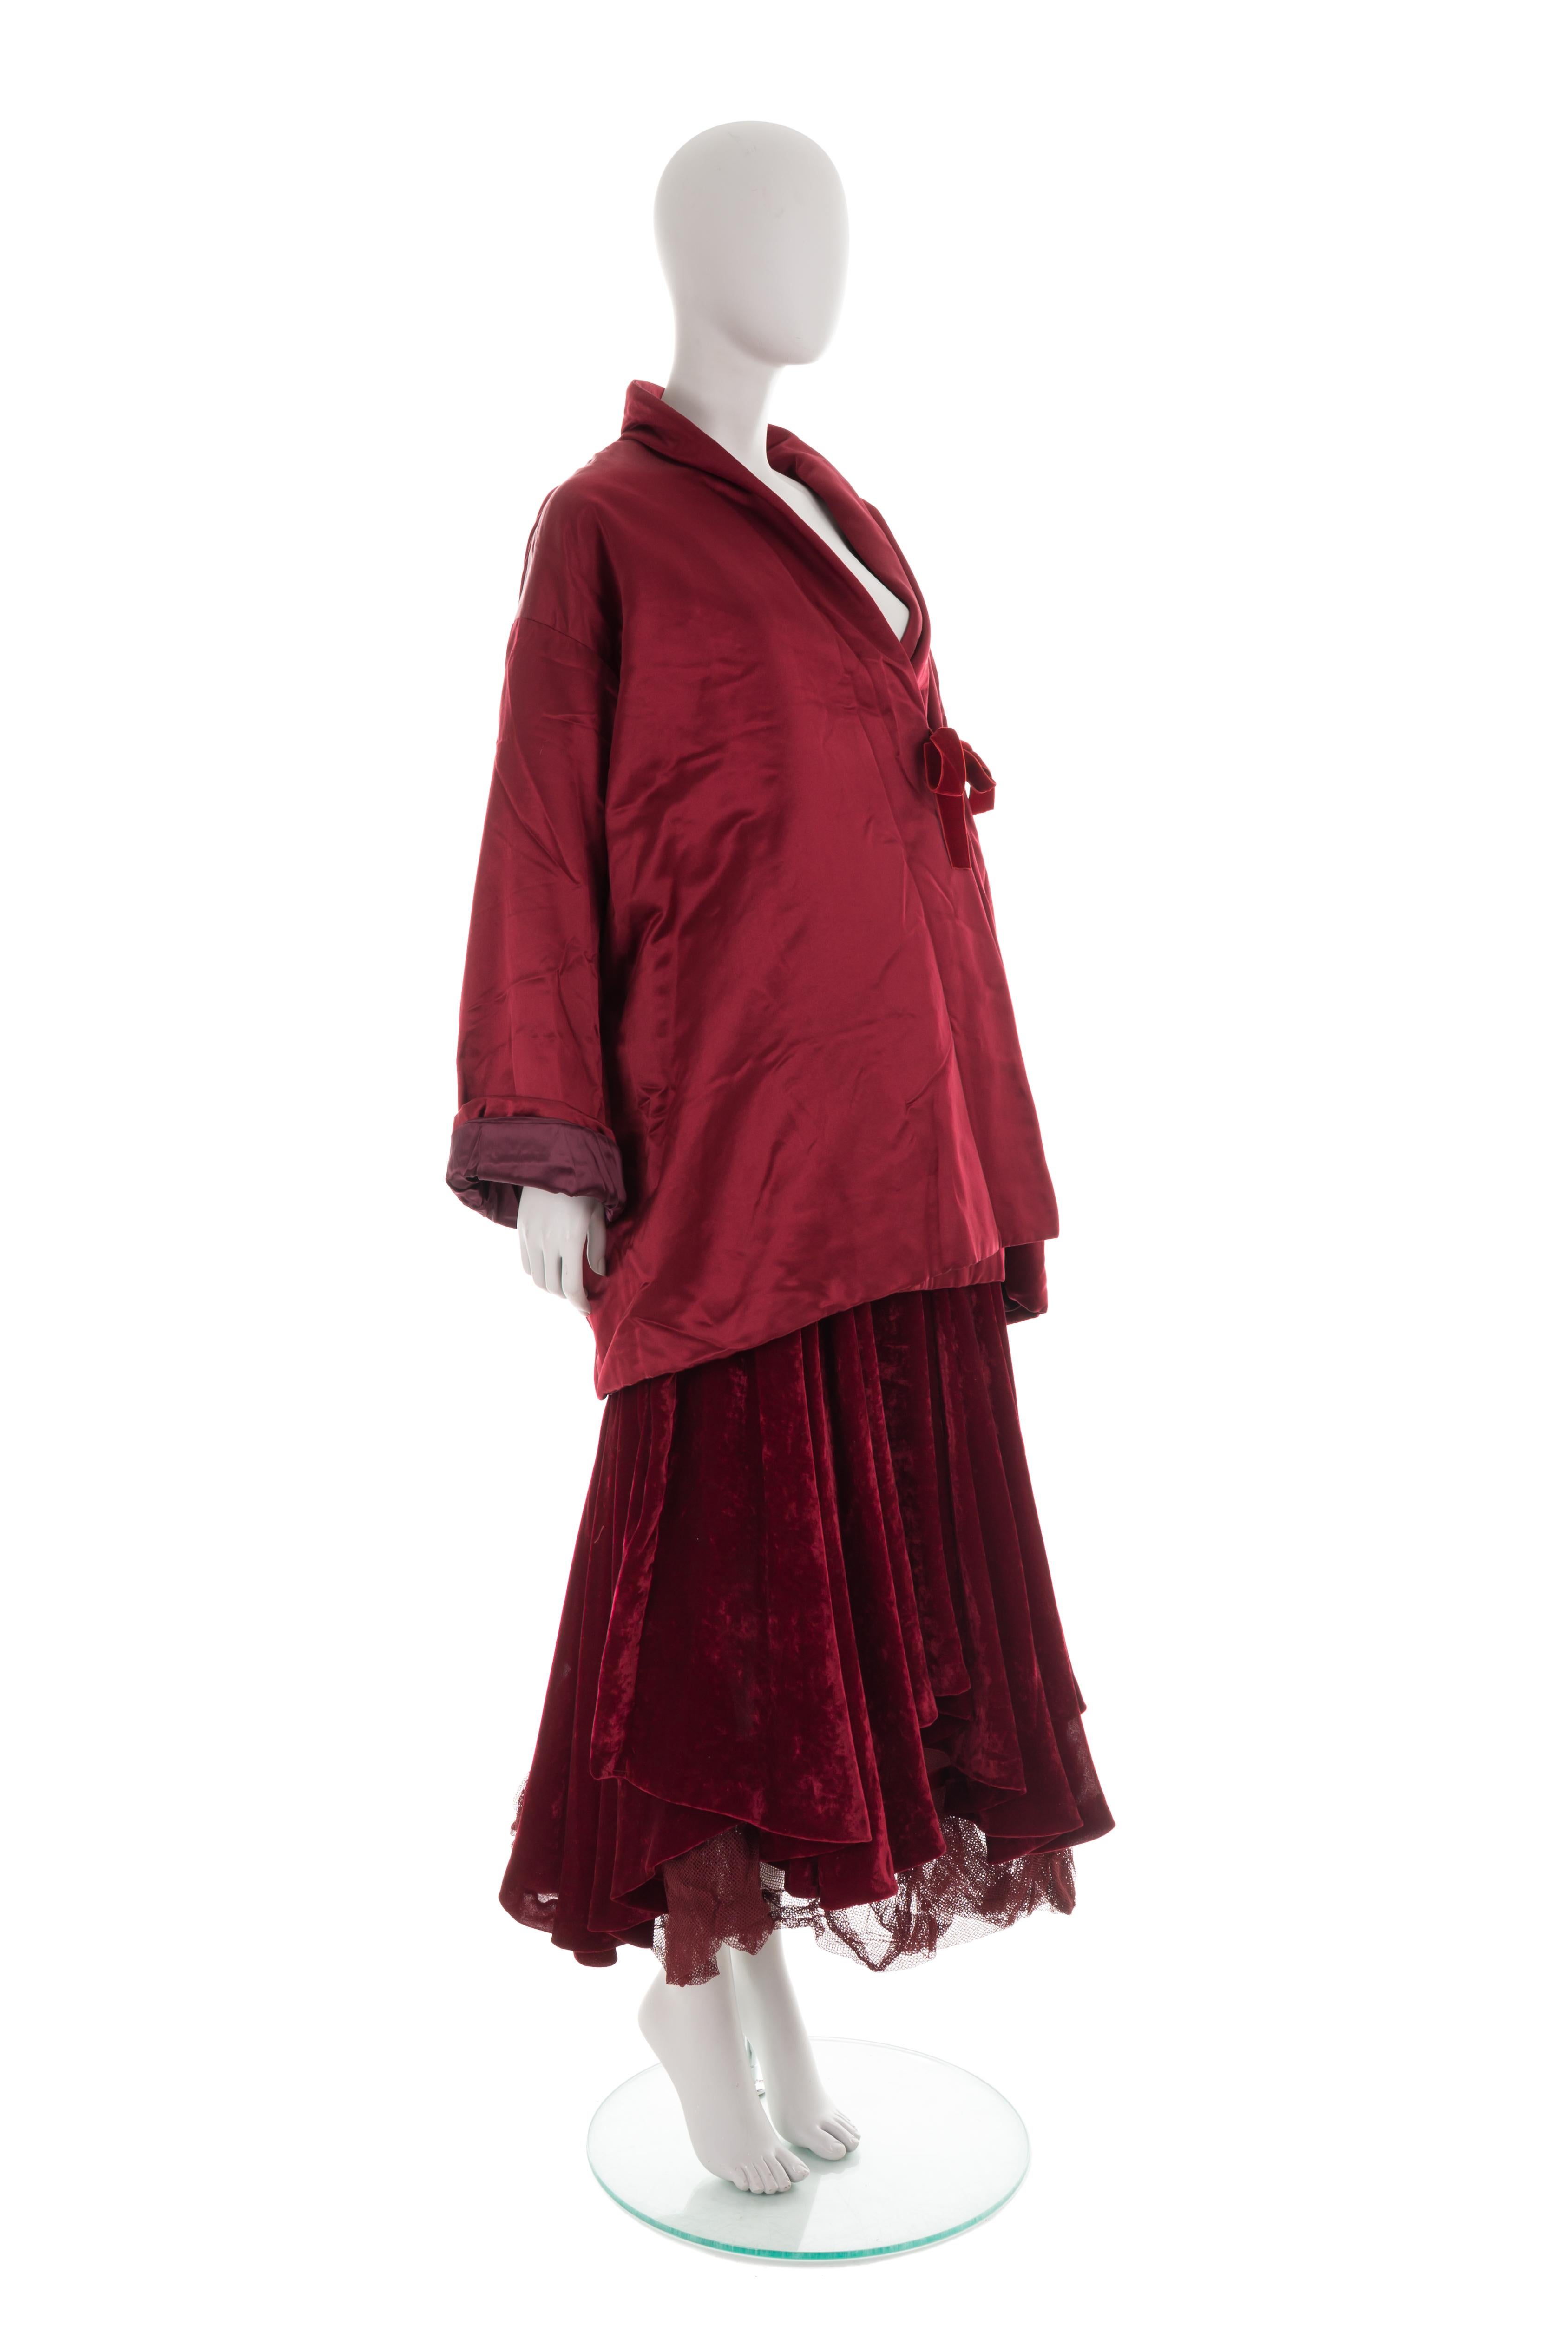 - Fall-winter 2000 collection
- Sold by Gold Palms Vintage
- Deep red/burgundy evening set
- Silk padded jacket with velvet strings
- High waist multi-layered skirt (constructed fishnet petticoat + velvet asymmetric overlay) 
- Size: IT 42 (jacket),